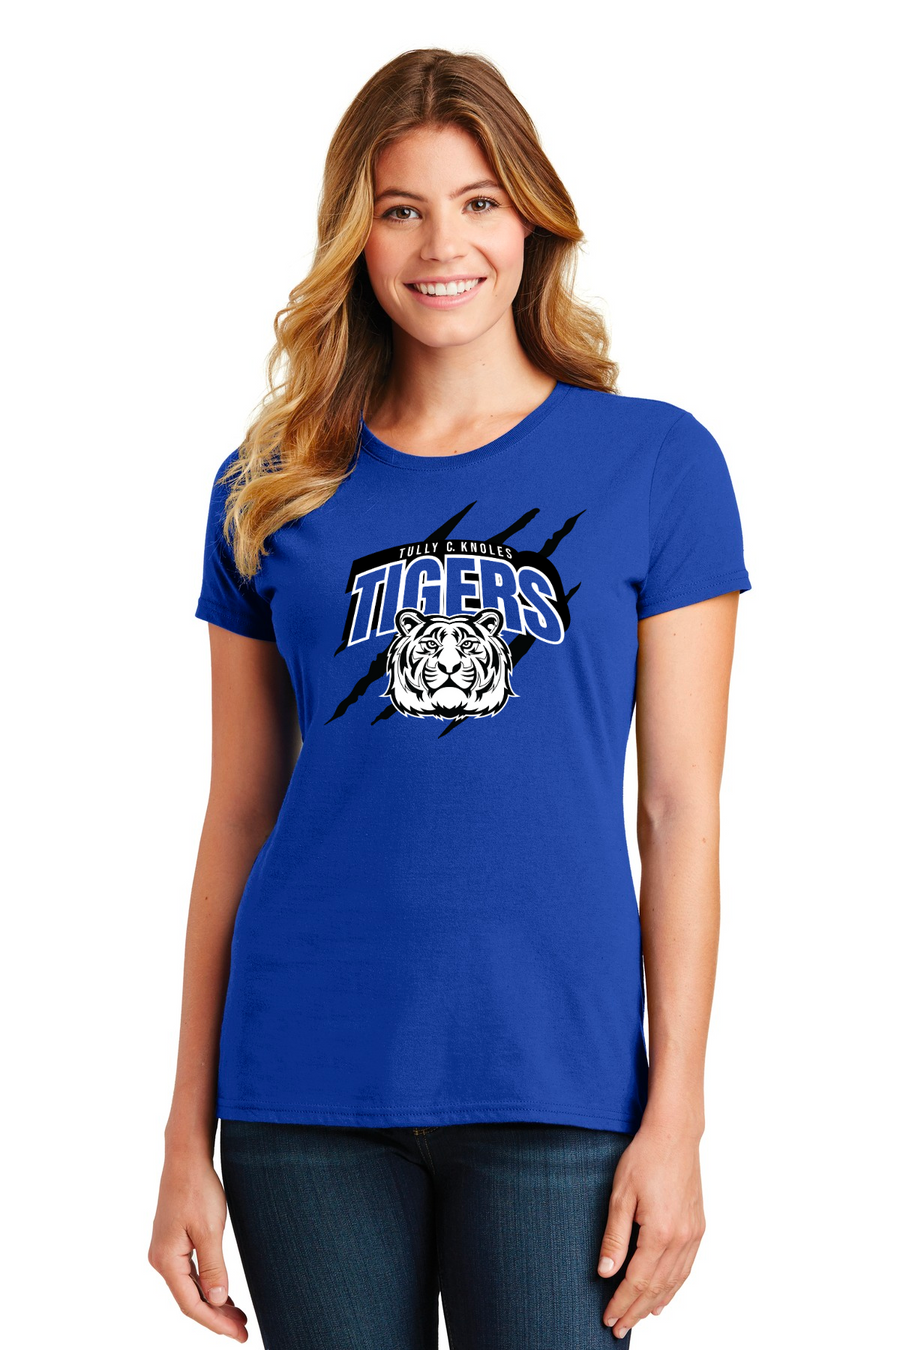 Tully C Knoles - Spirit Wear 23/24 On-Demand-Port and Co Ladies Favorite Shirt Tiger Logo